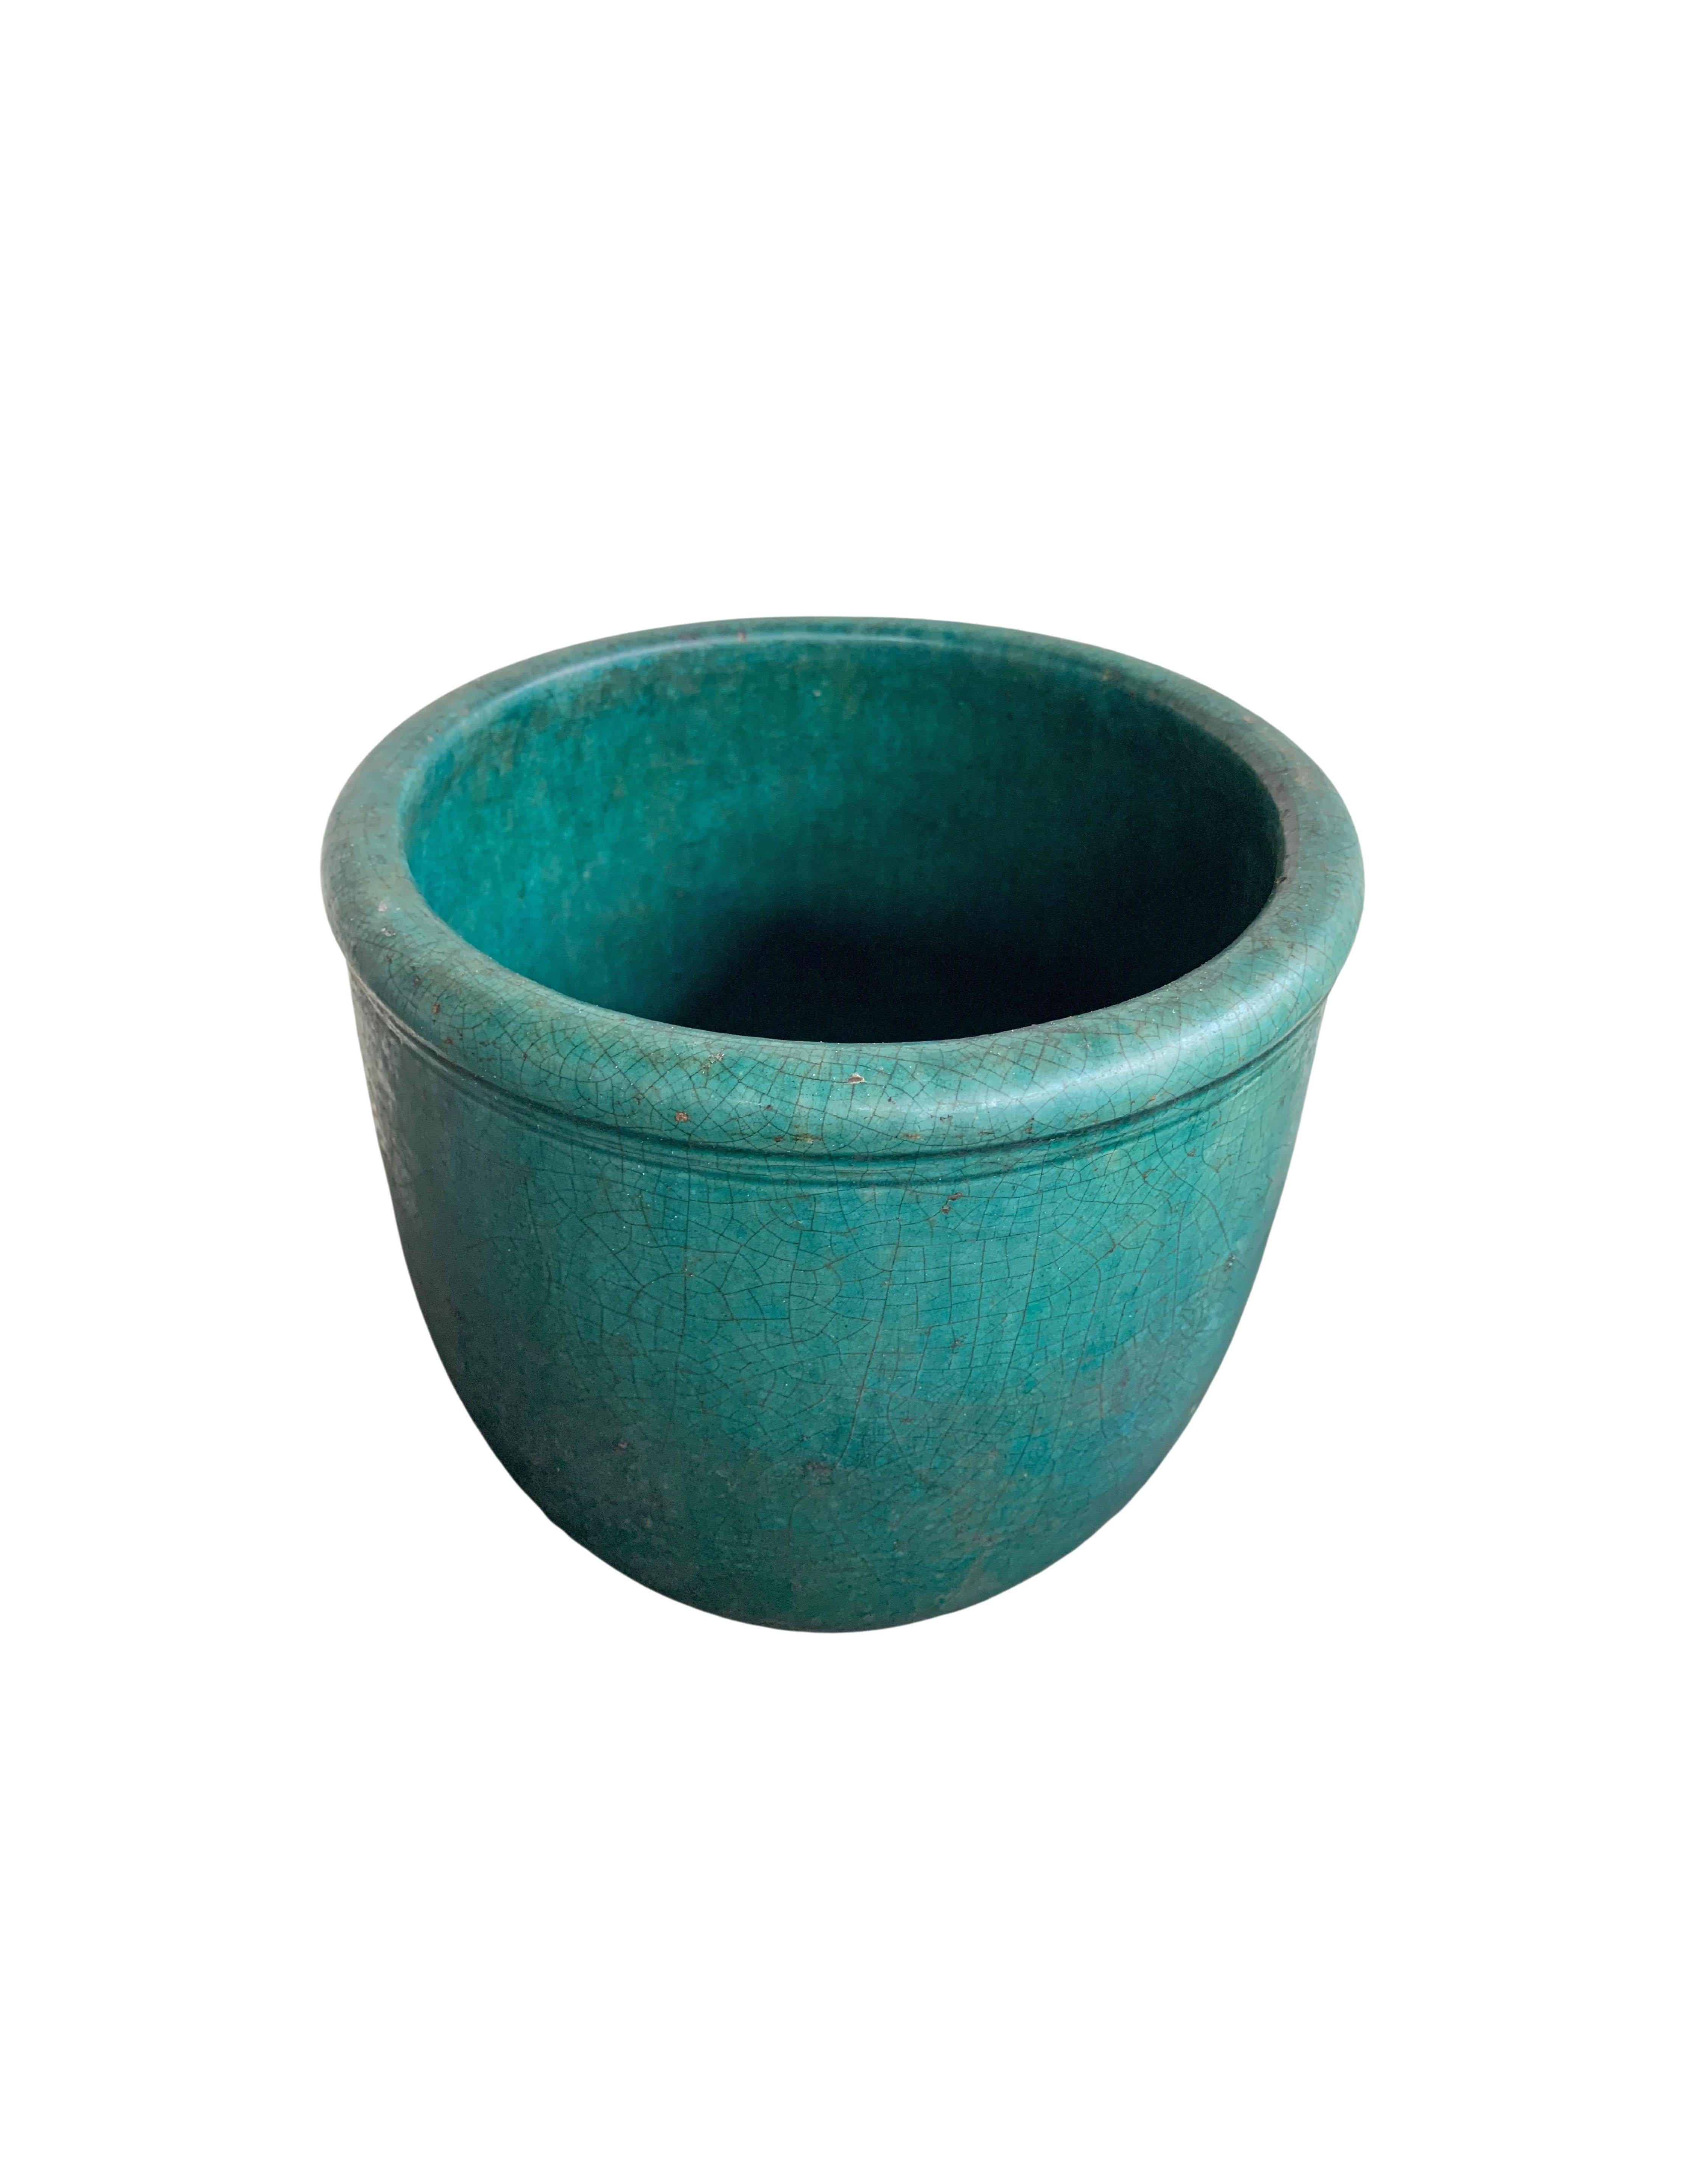 20th Century Chinese Green Glazed Jar / Planter, c. 1900 For Sale